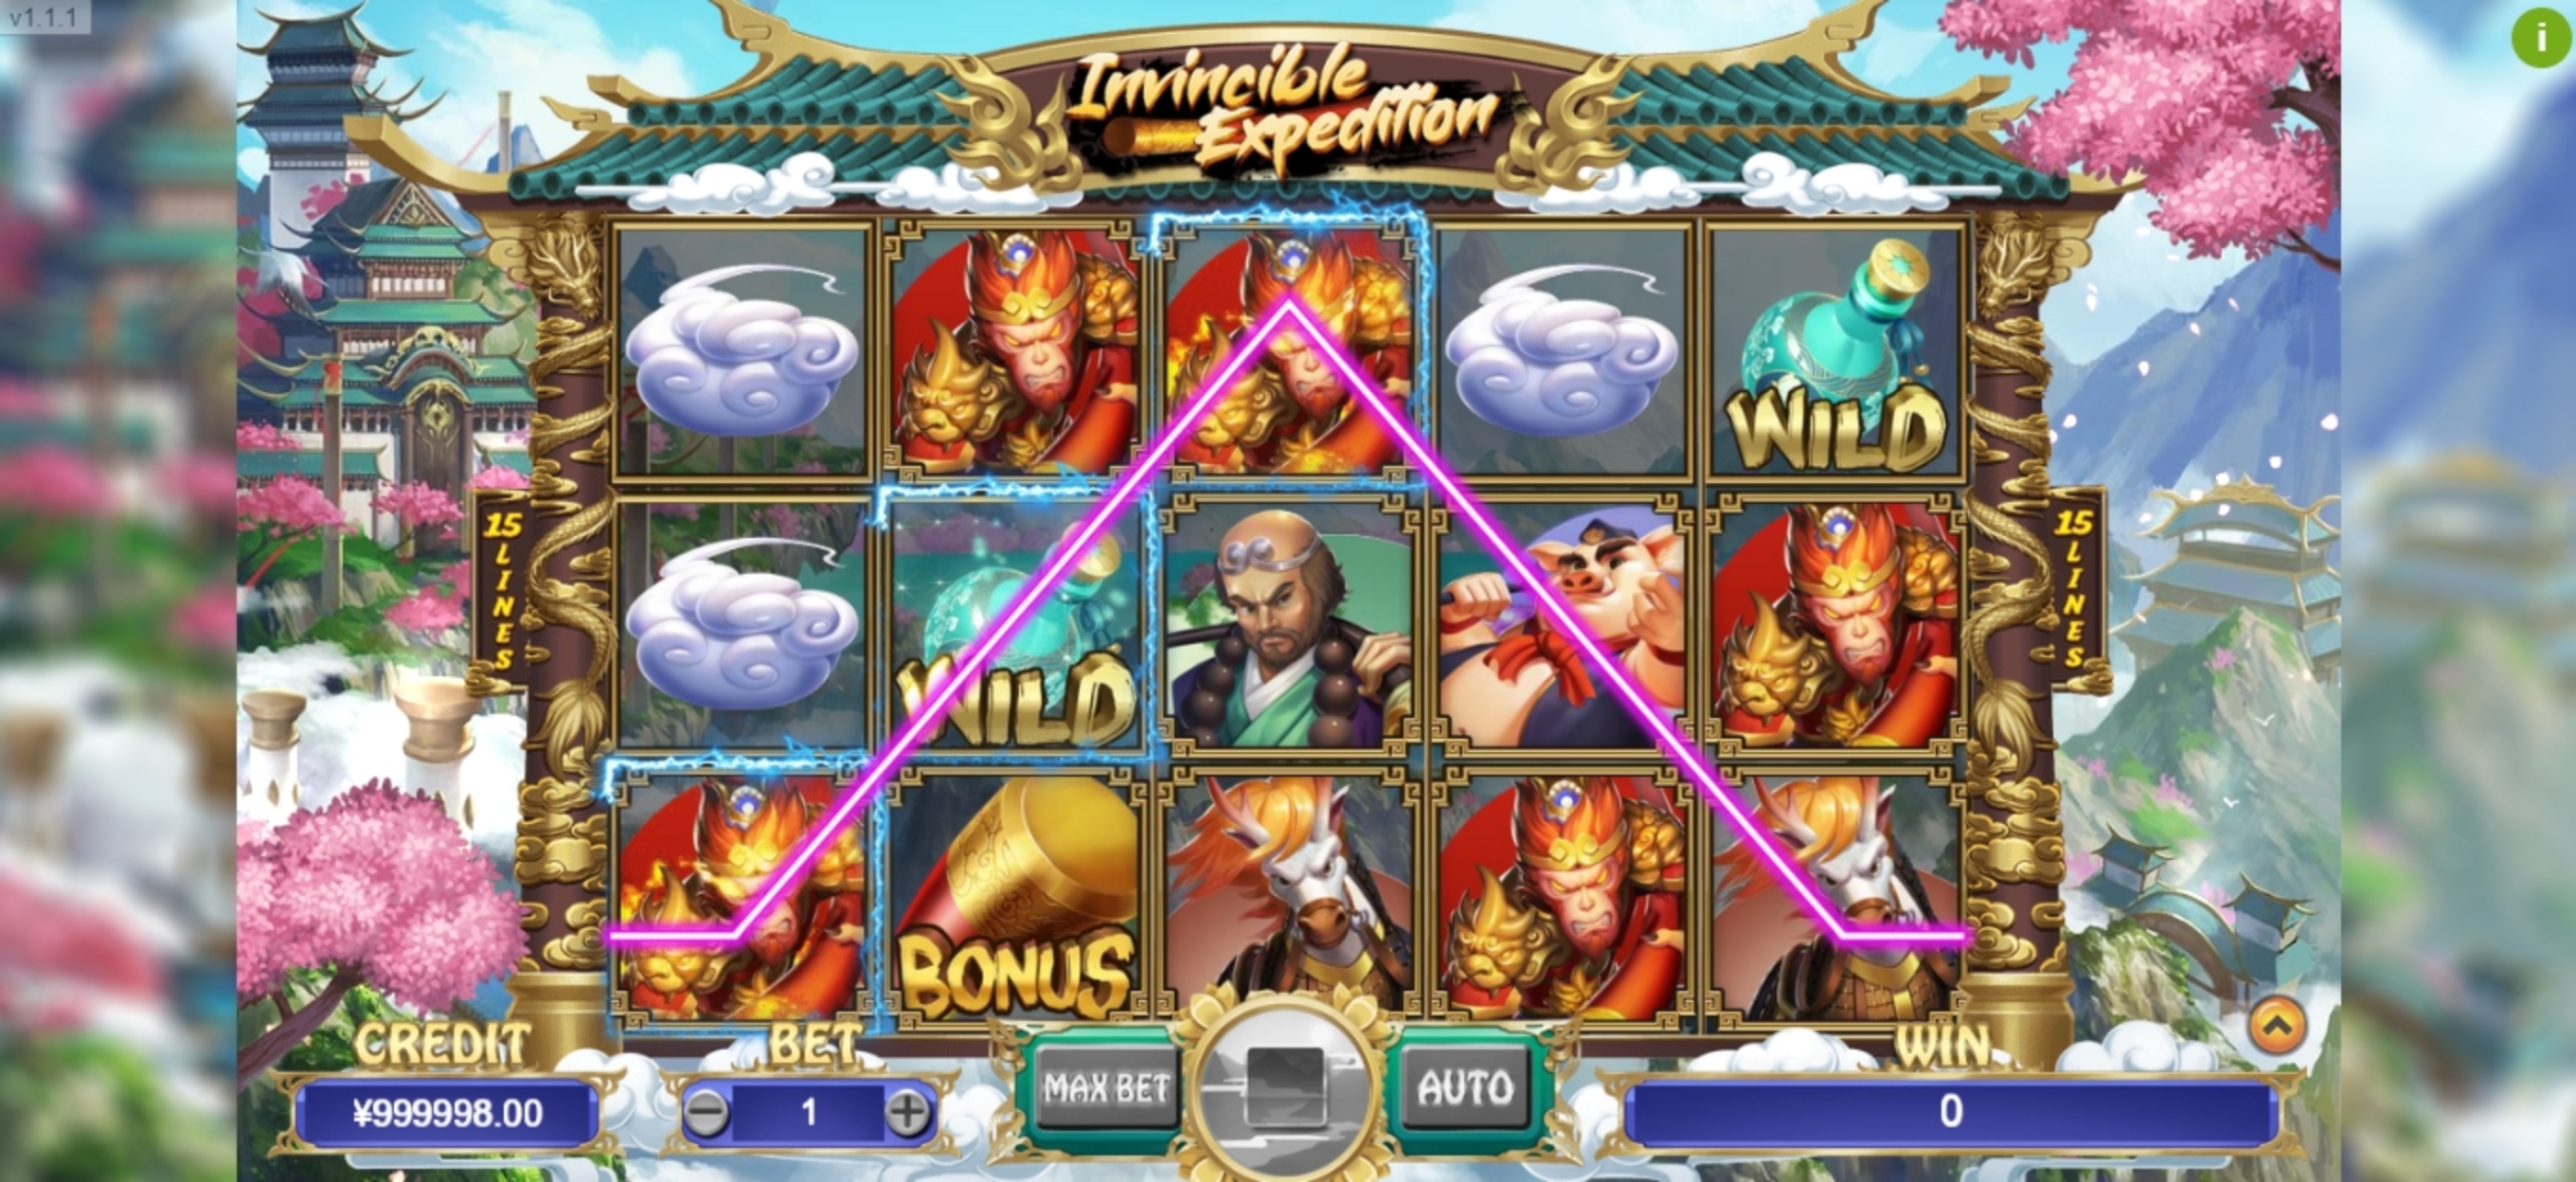 Win Money in Invincible Expedition Free Slot Game by TIDY